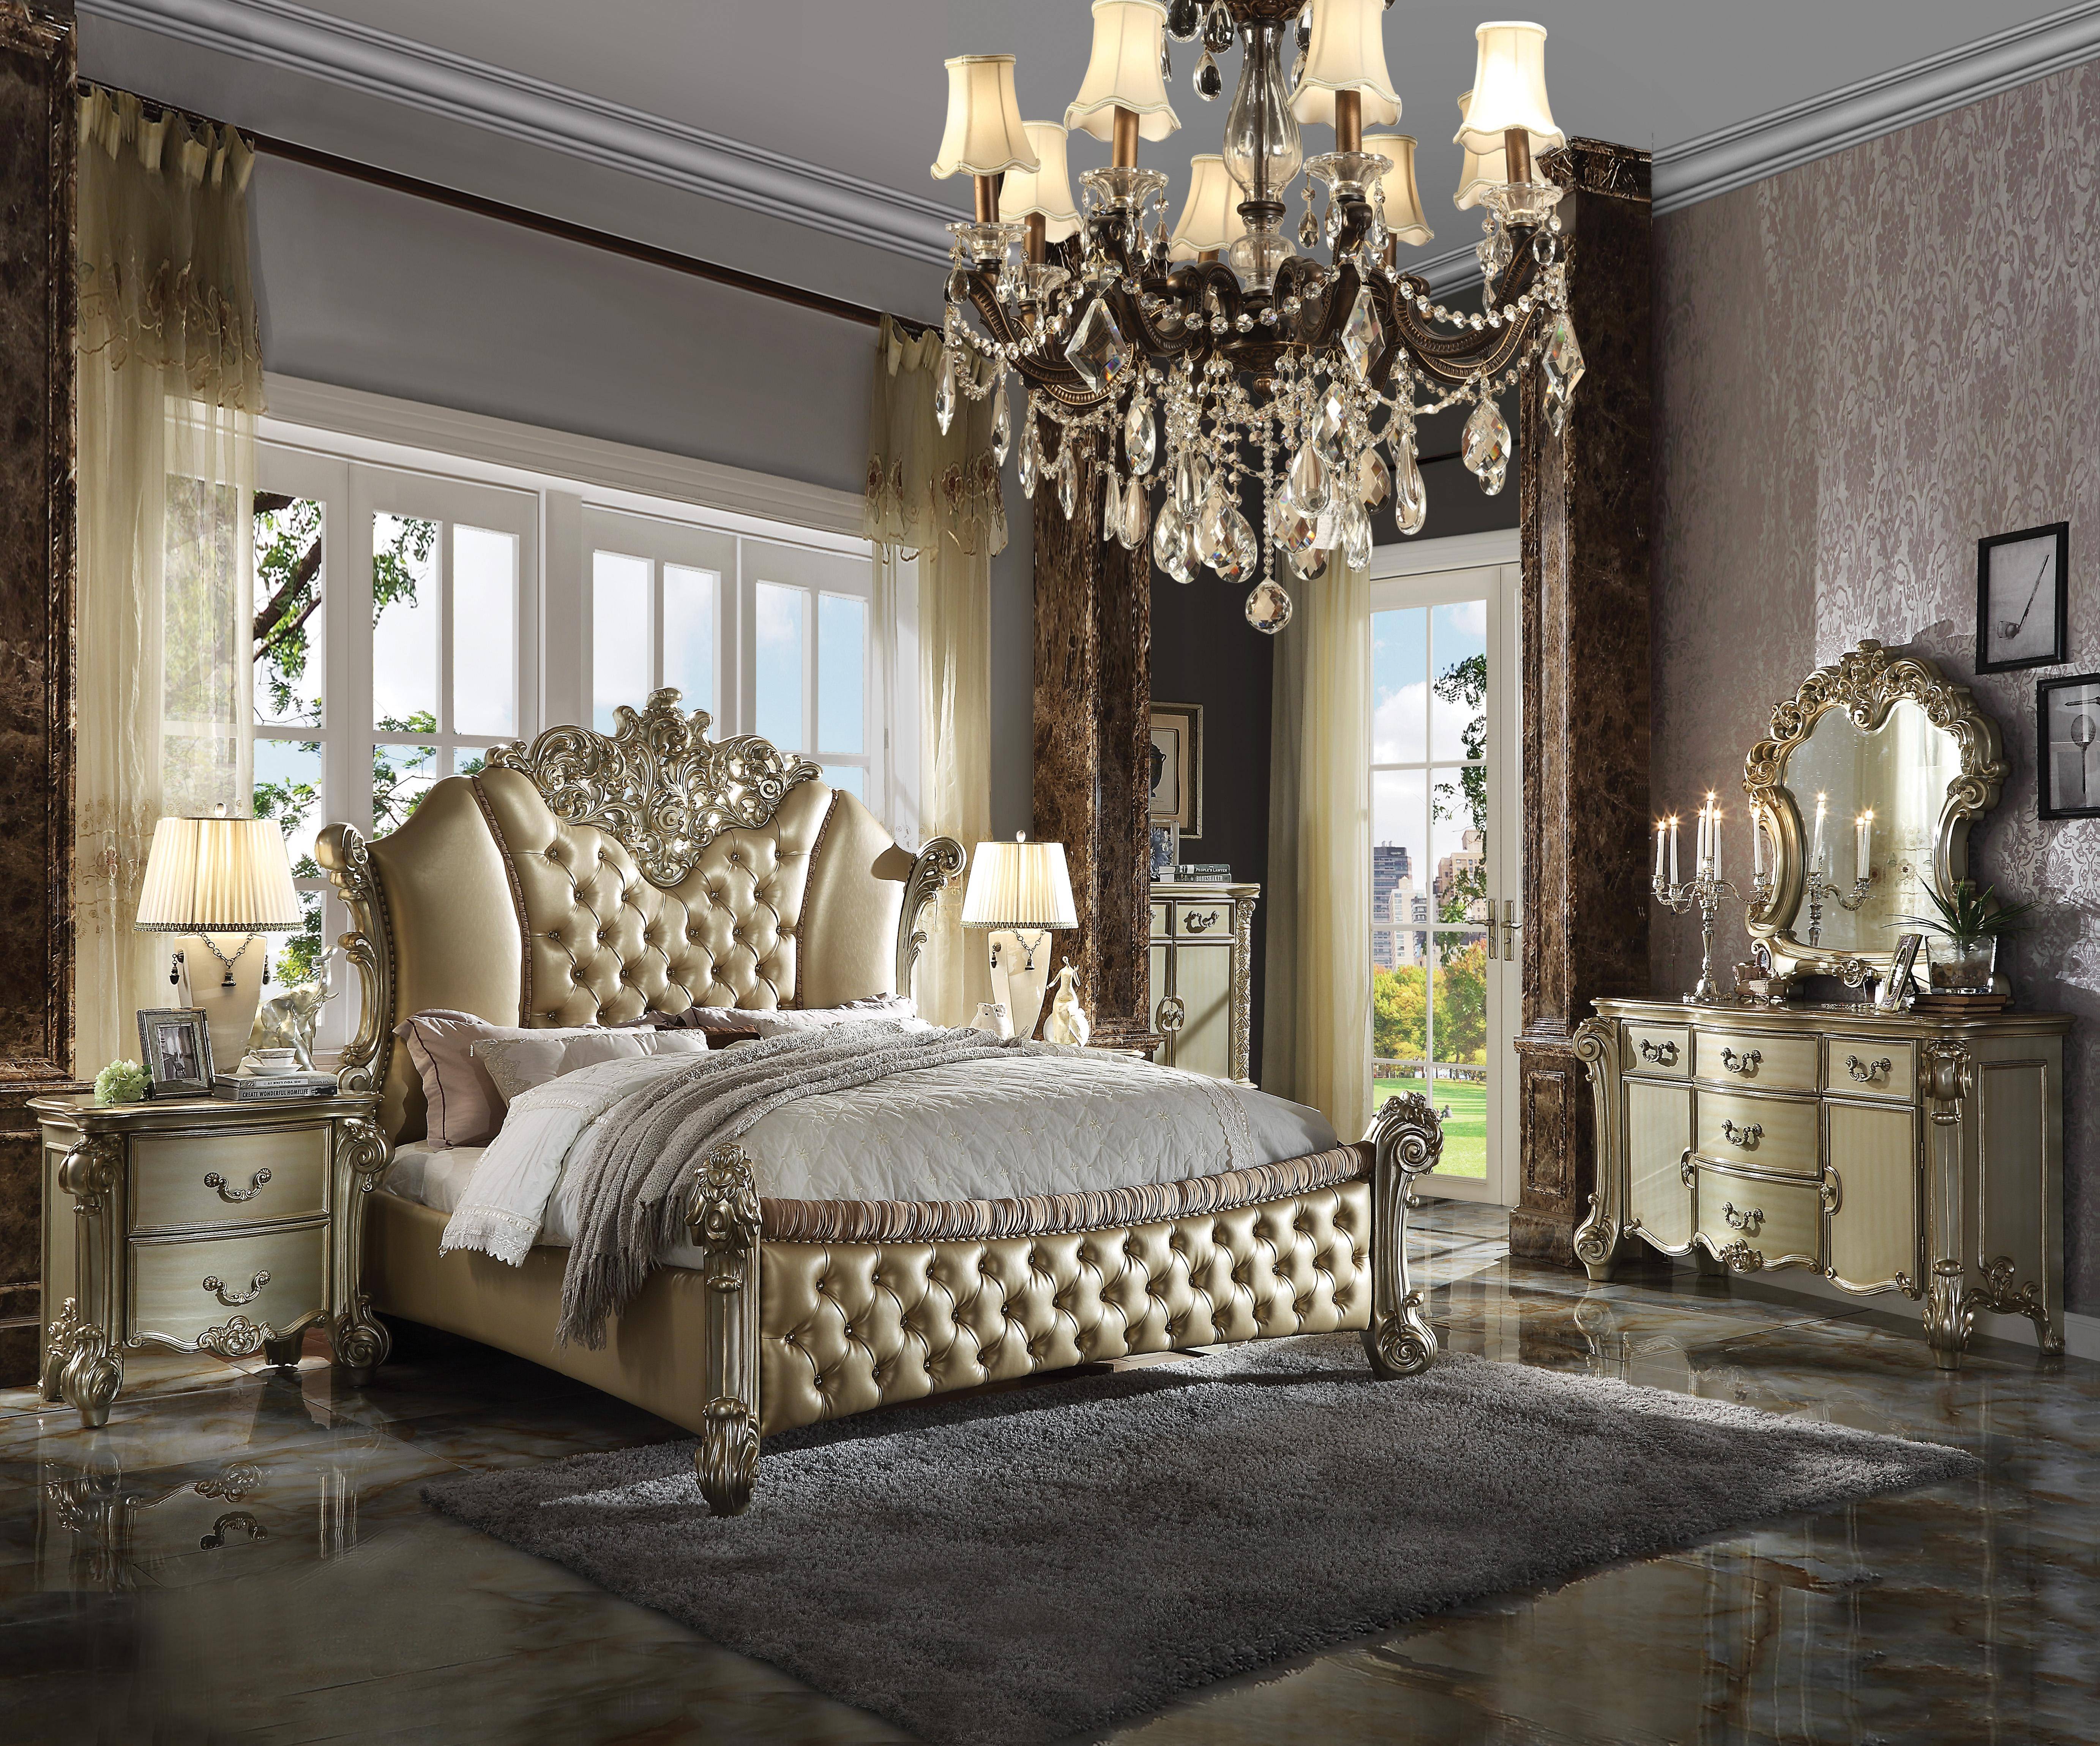 5Pc Bedroom Furniture Set Button Tufted Headboard Gold Patina Finish Eastern King Size Bed